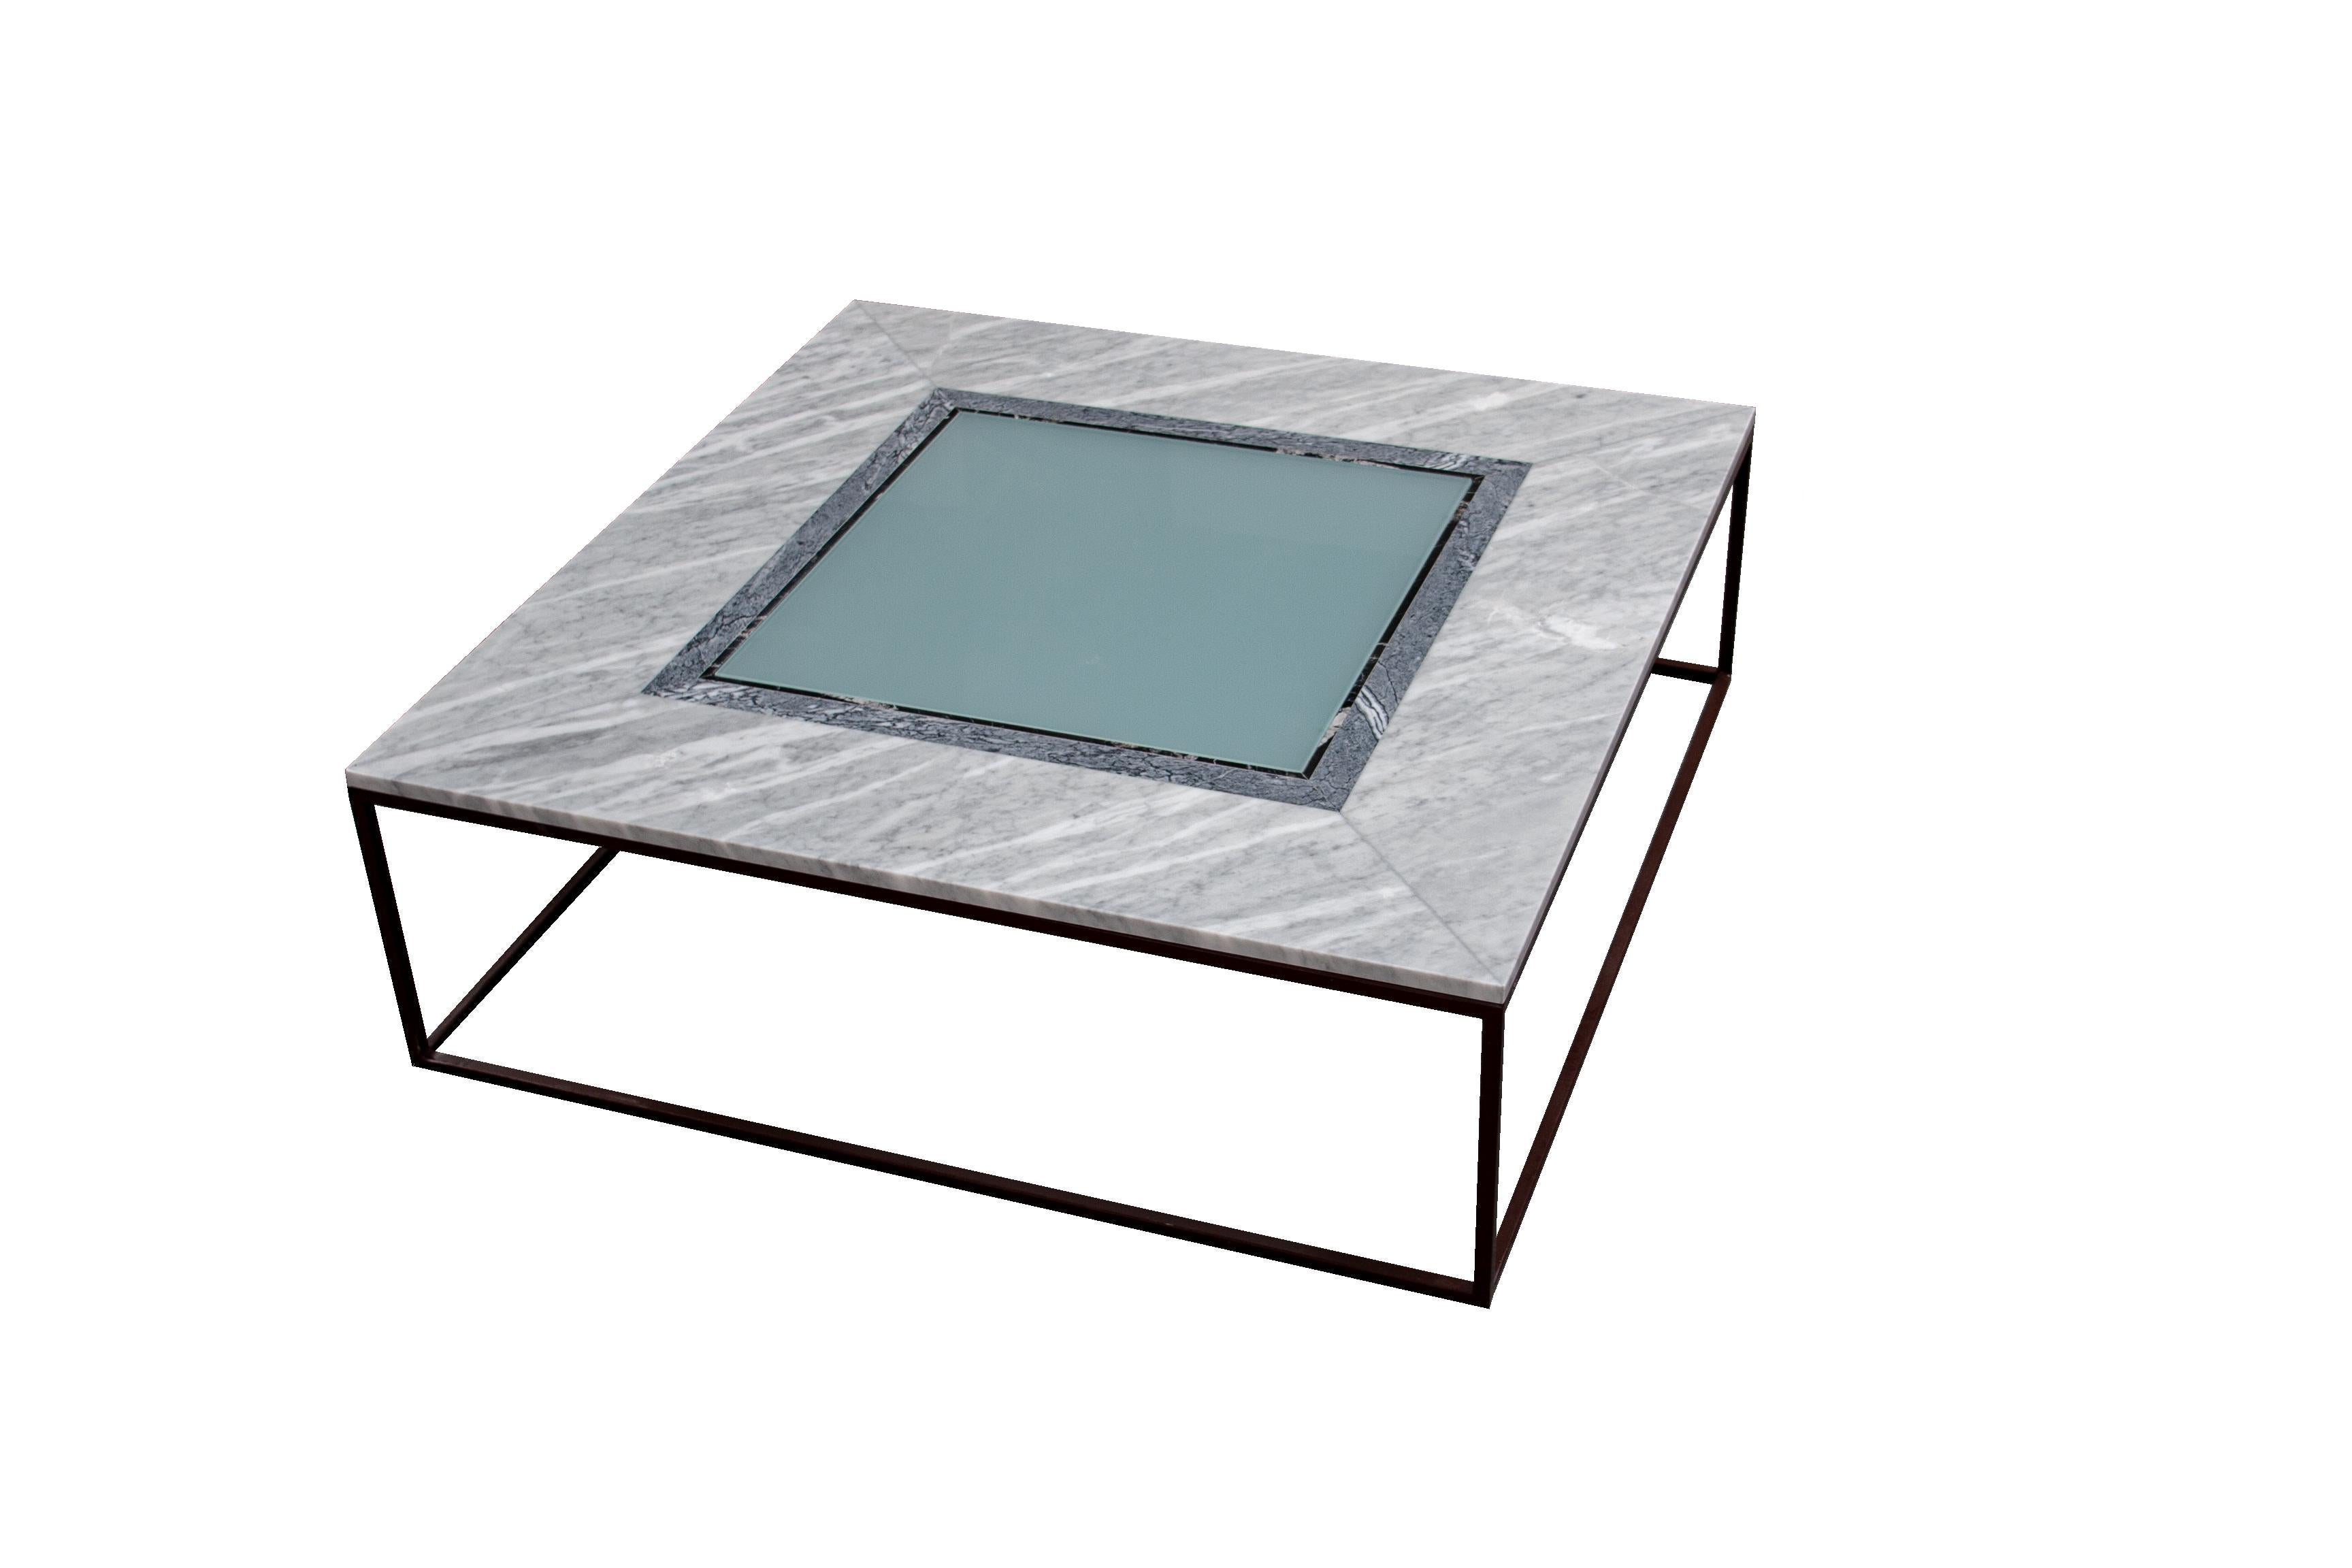 Coffee Table Grey Marble & Smoked Glass One-of-a-Kind Piece Spain Contemporary is a unique marble table with three varieties of marble in polished finish.
On the surface, gray marble of Portuguese origin prevails, with two small plinths of dark